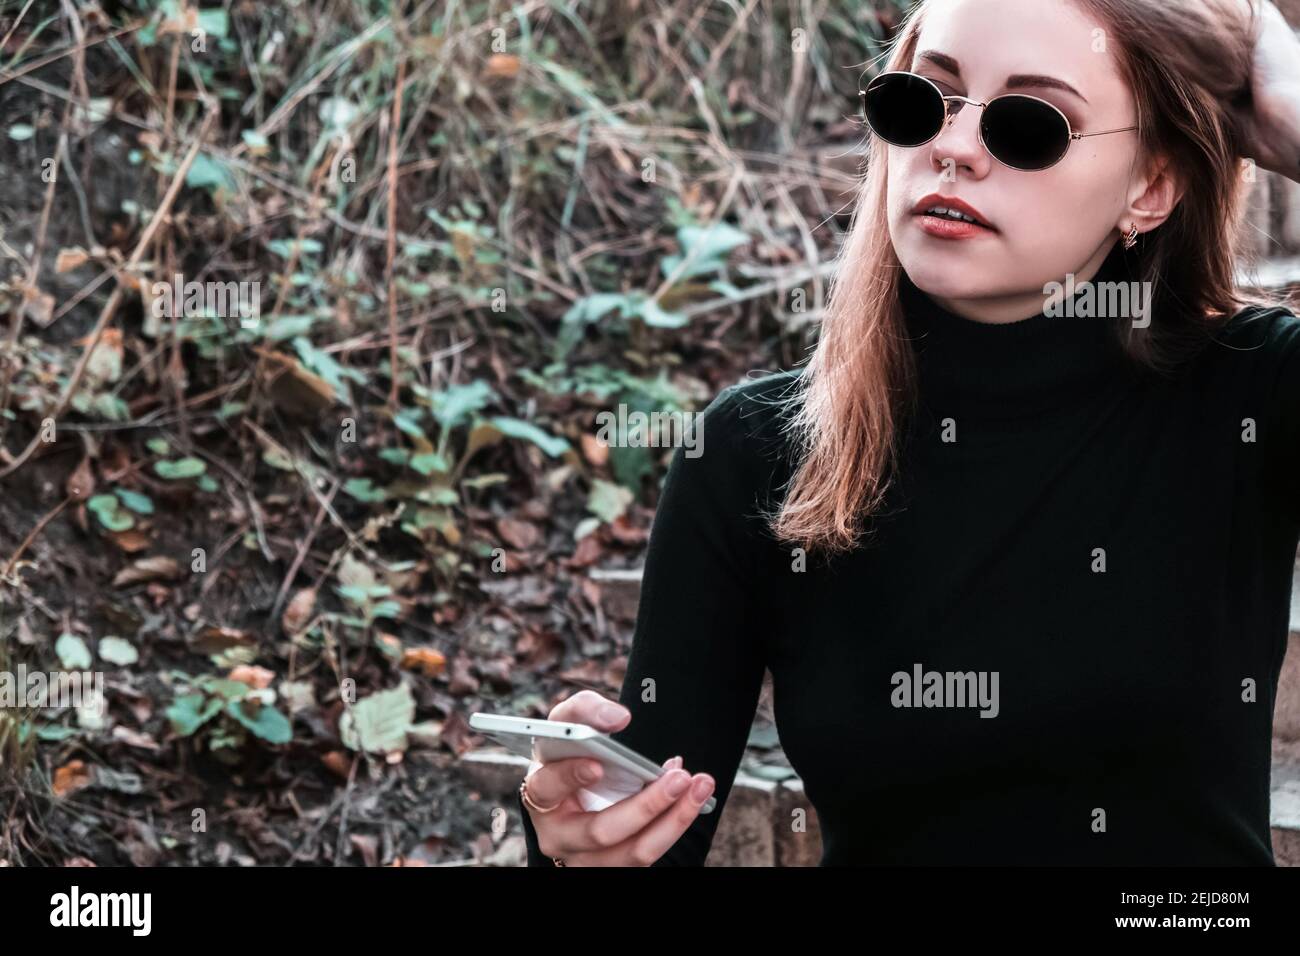 Portrait of young stylish modern woman in sunglasses and black turtleneck sitting on the steps in the park holding mobile phone in her hand. Woman enj Stock Photo